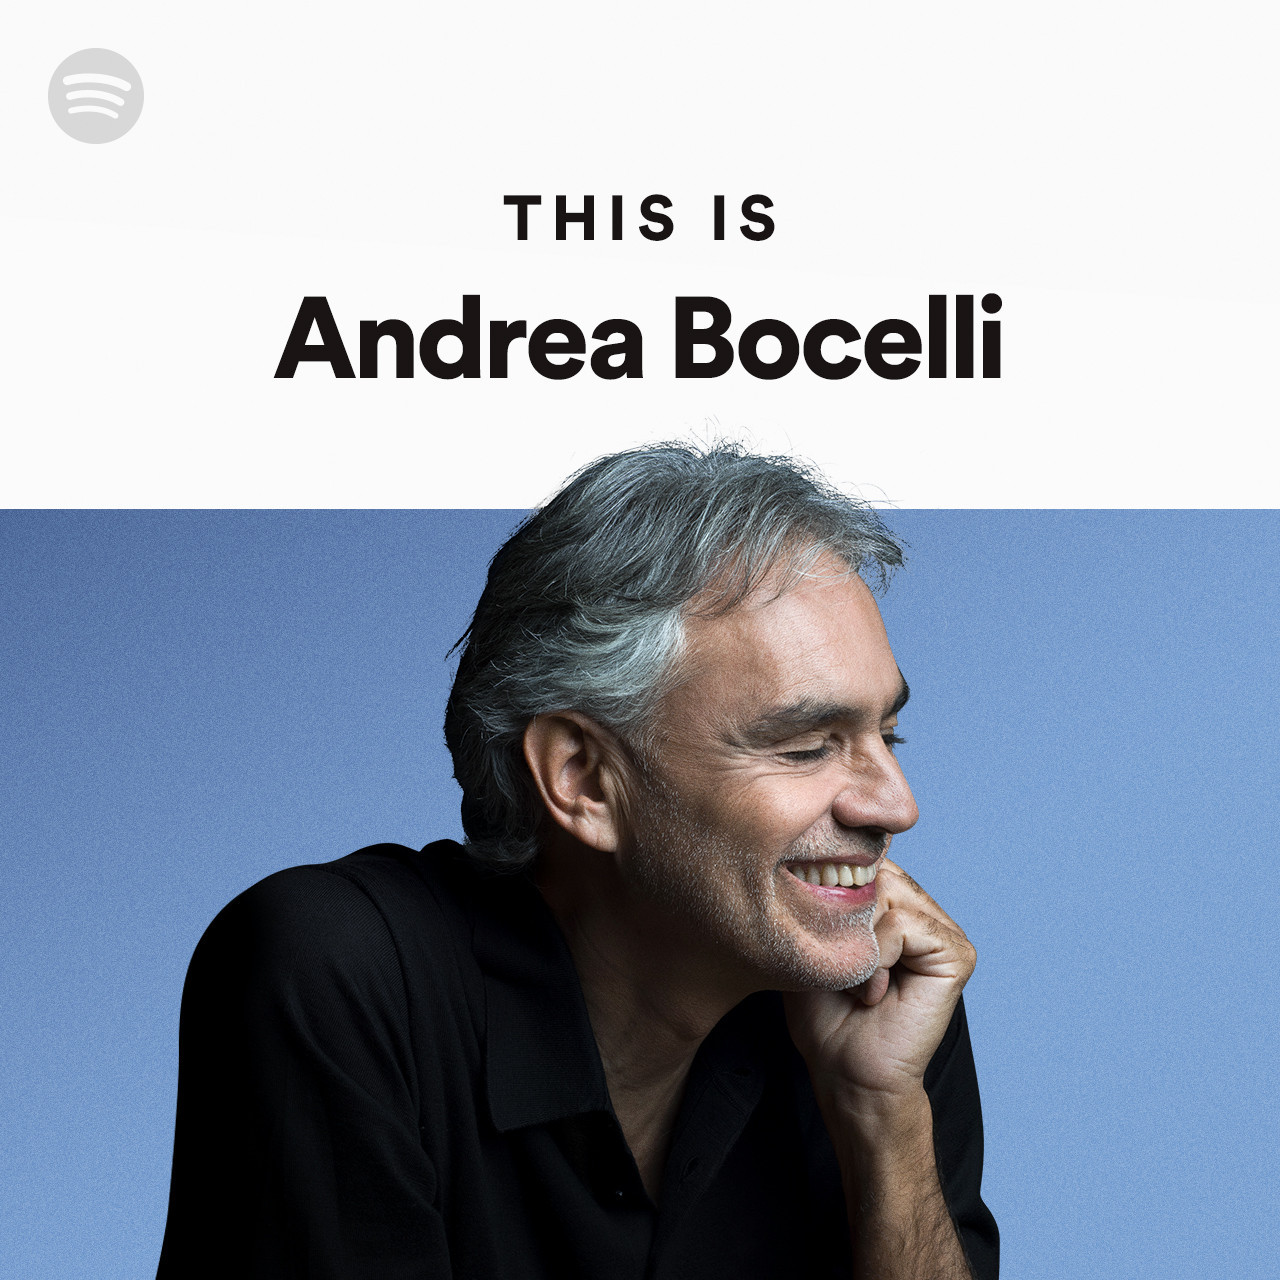 This Is Andrea Bocelli - playlist by Spotify | Spotify